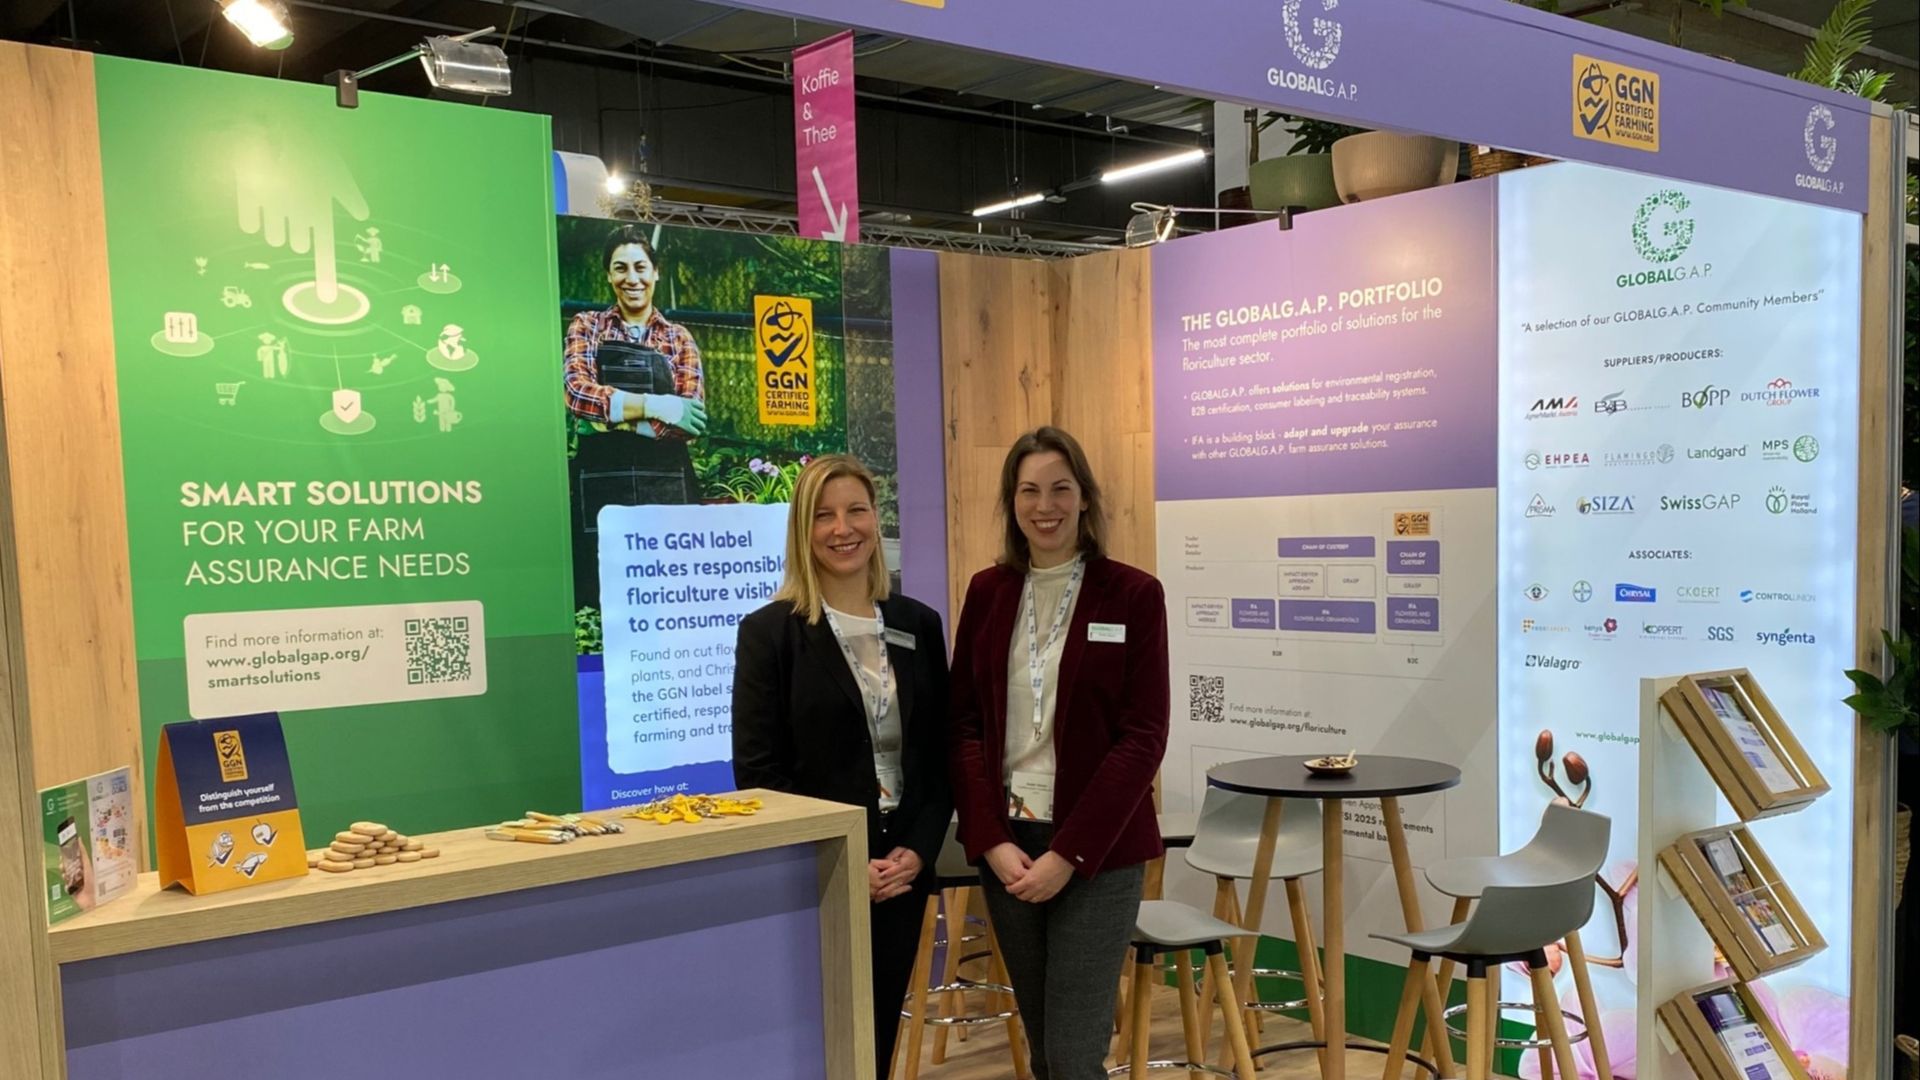 Image of GLOBALG.A.P. staff at the Aalsmeer trade fair in the Netherlands